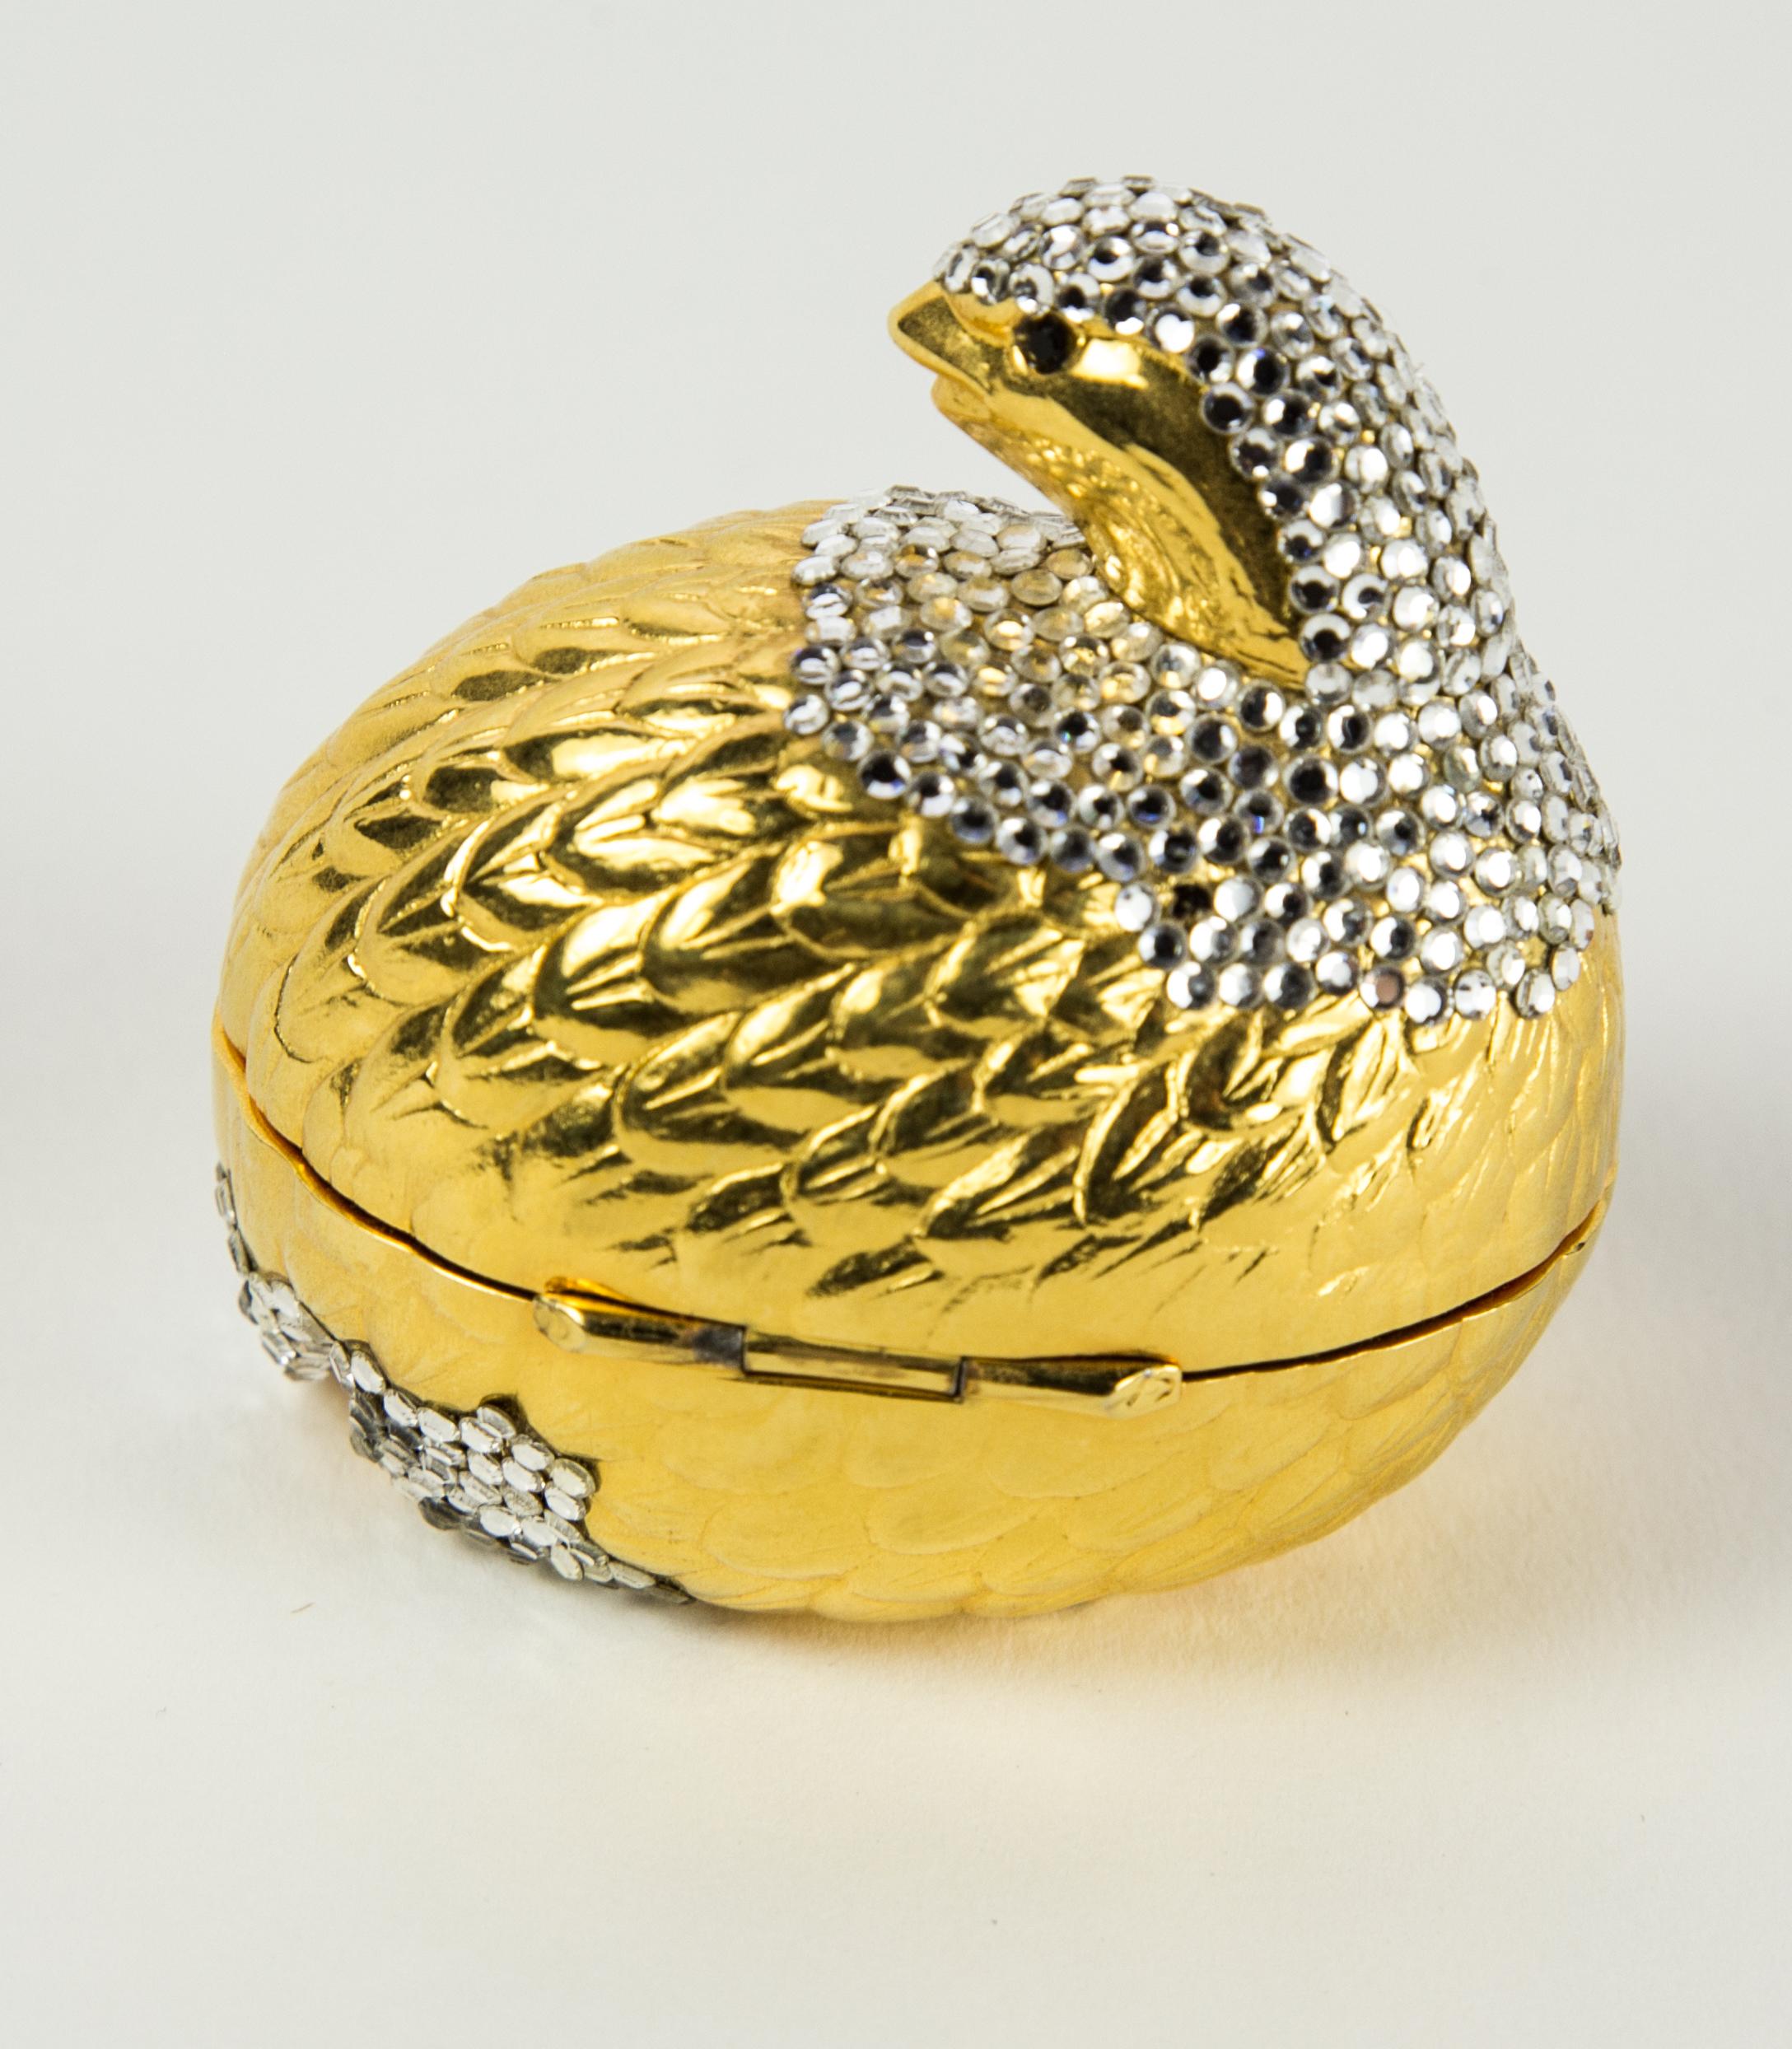 Beautiful signed Judith Leiber Golden Quail Pill Box enhanced with inlaid Swarovski Crystals; Approximate Size: 2